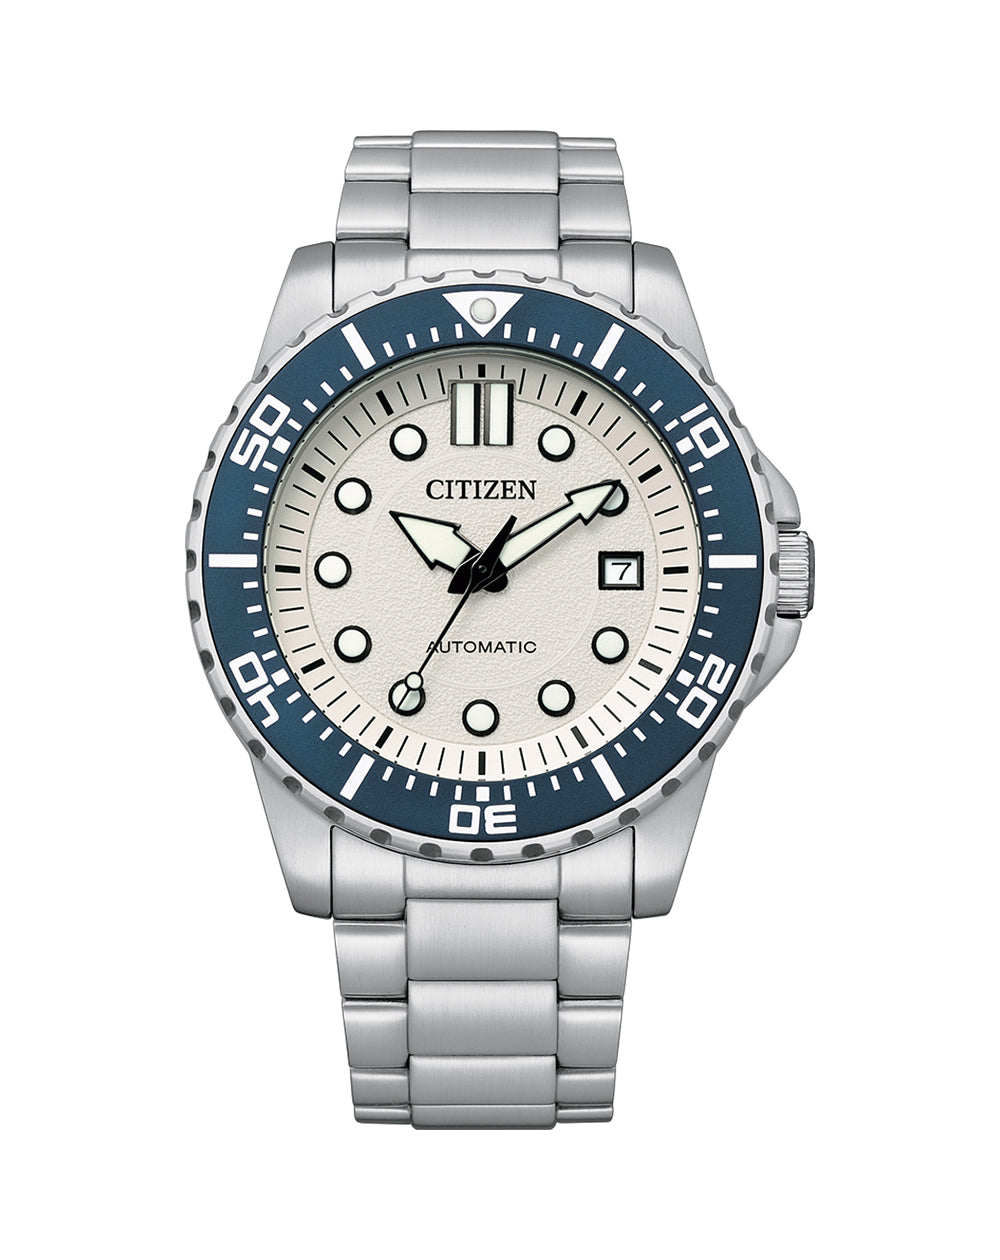 Citizen Gents Auotomatic Watch with Stainless Steel Case